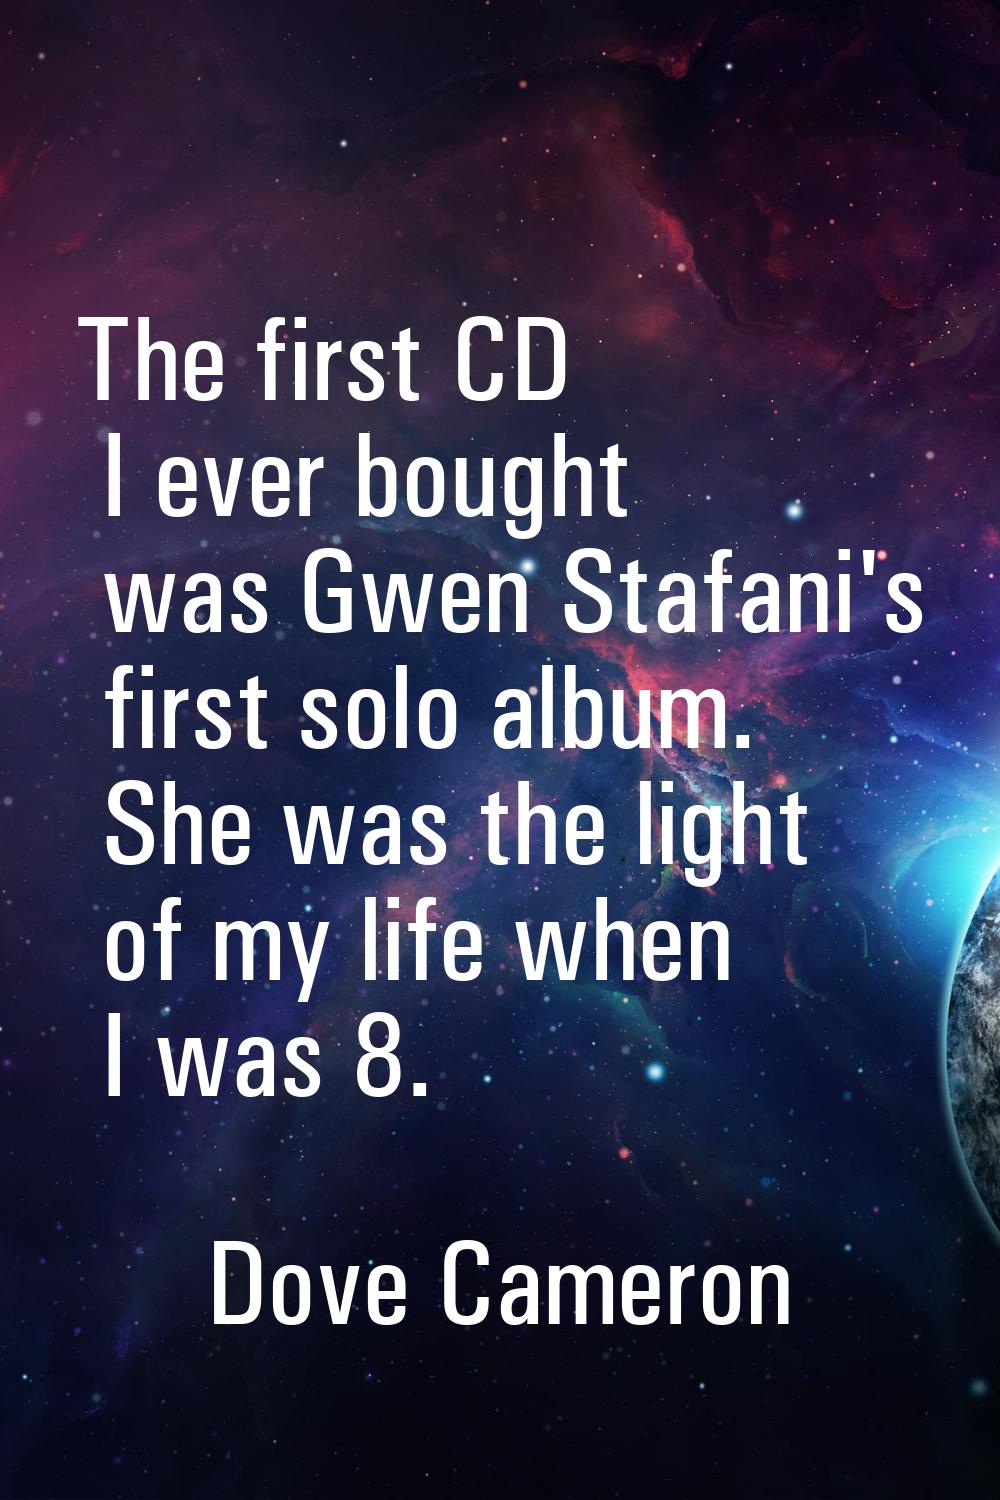 The first CD I ever bought was Gwen Stafani's first solo album. She was the light of my life when I